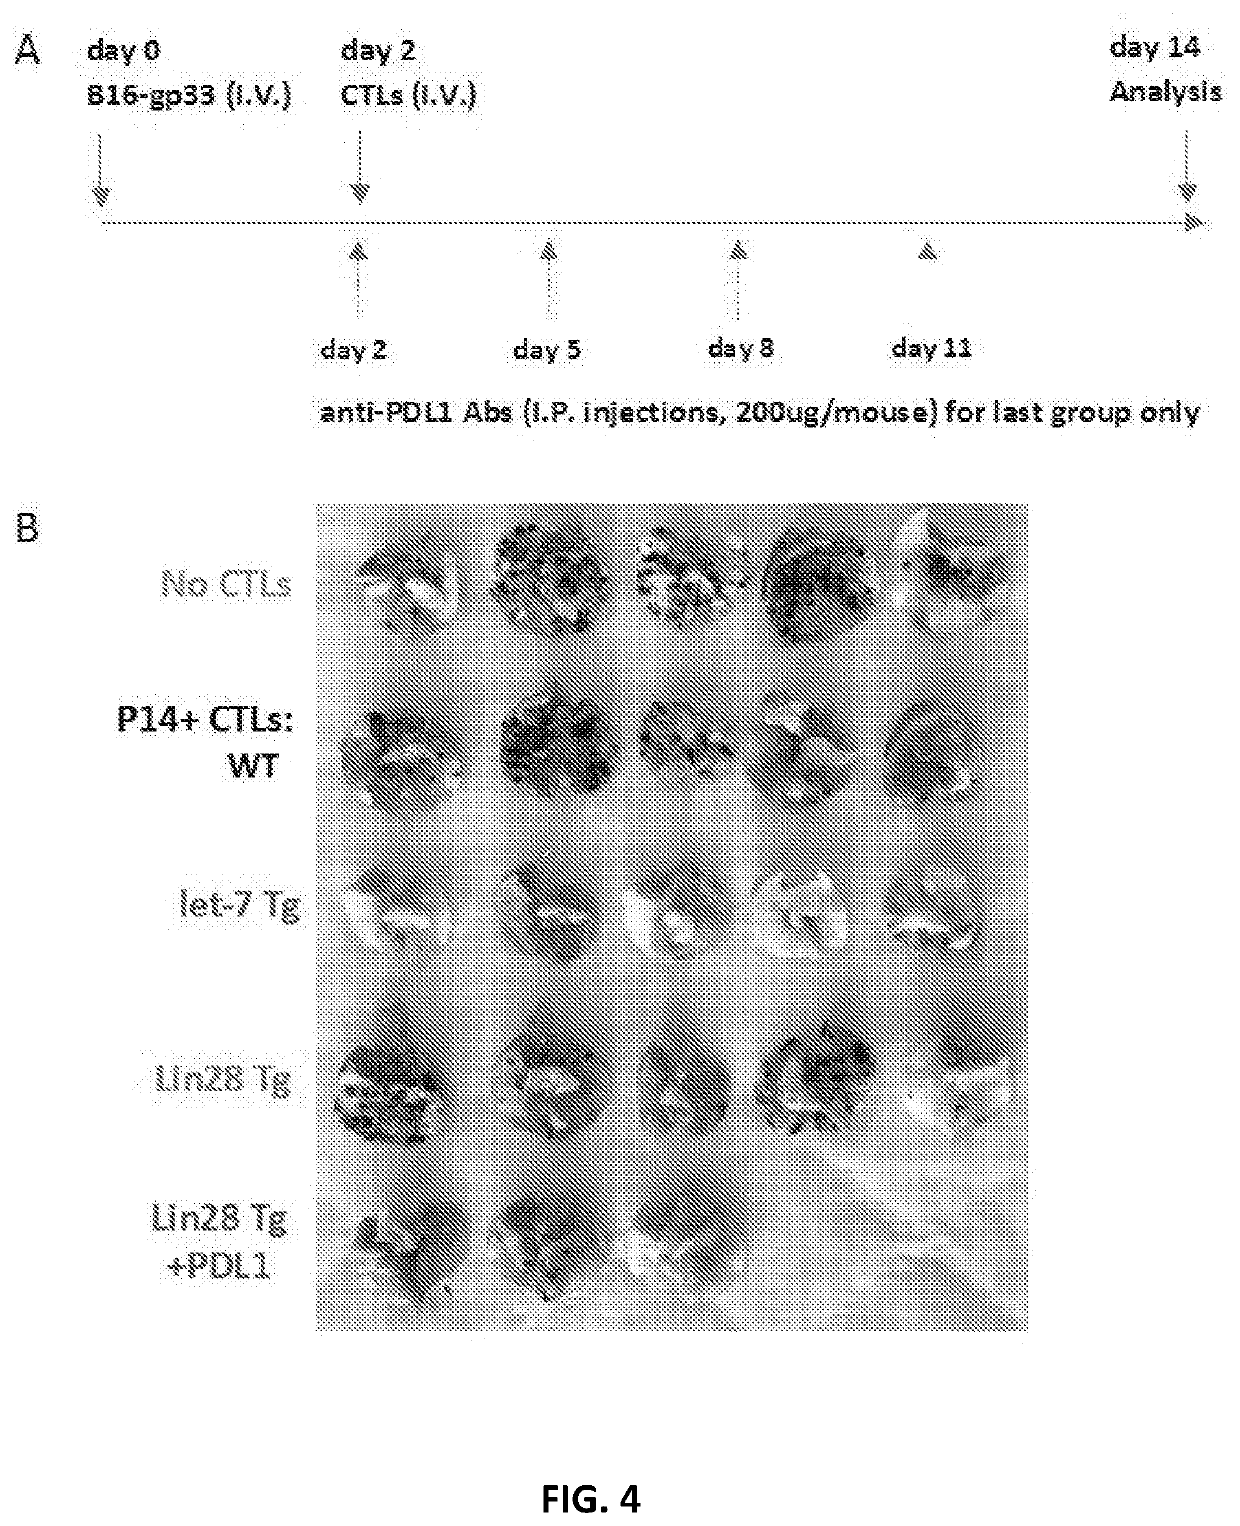 Let-7 promotes Anti-tumor activity of cd8 t cells and memory formation in vivio